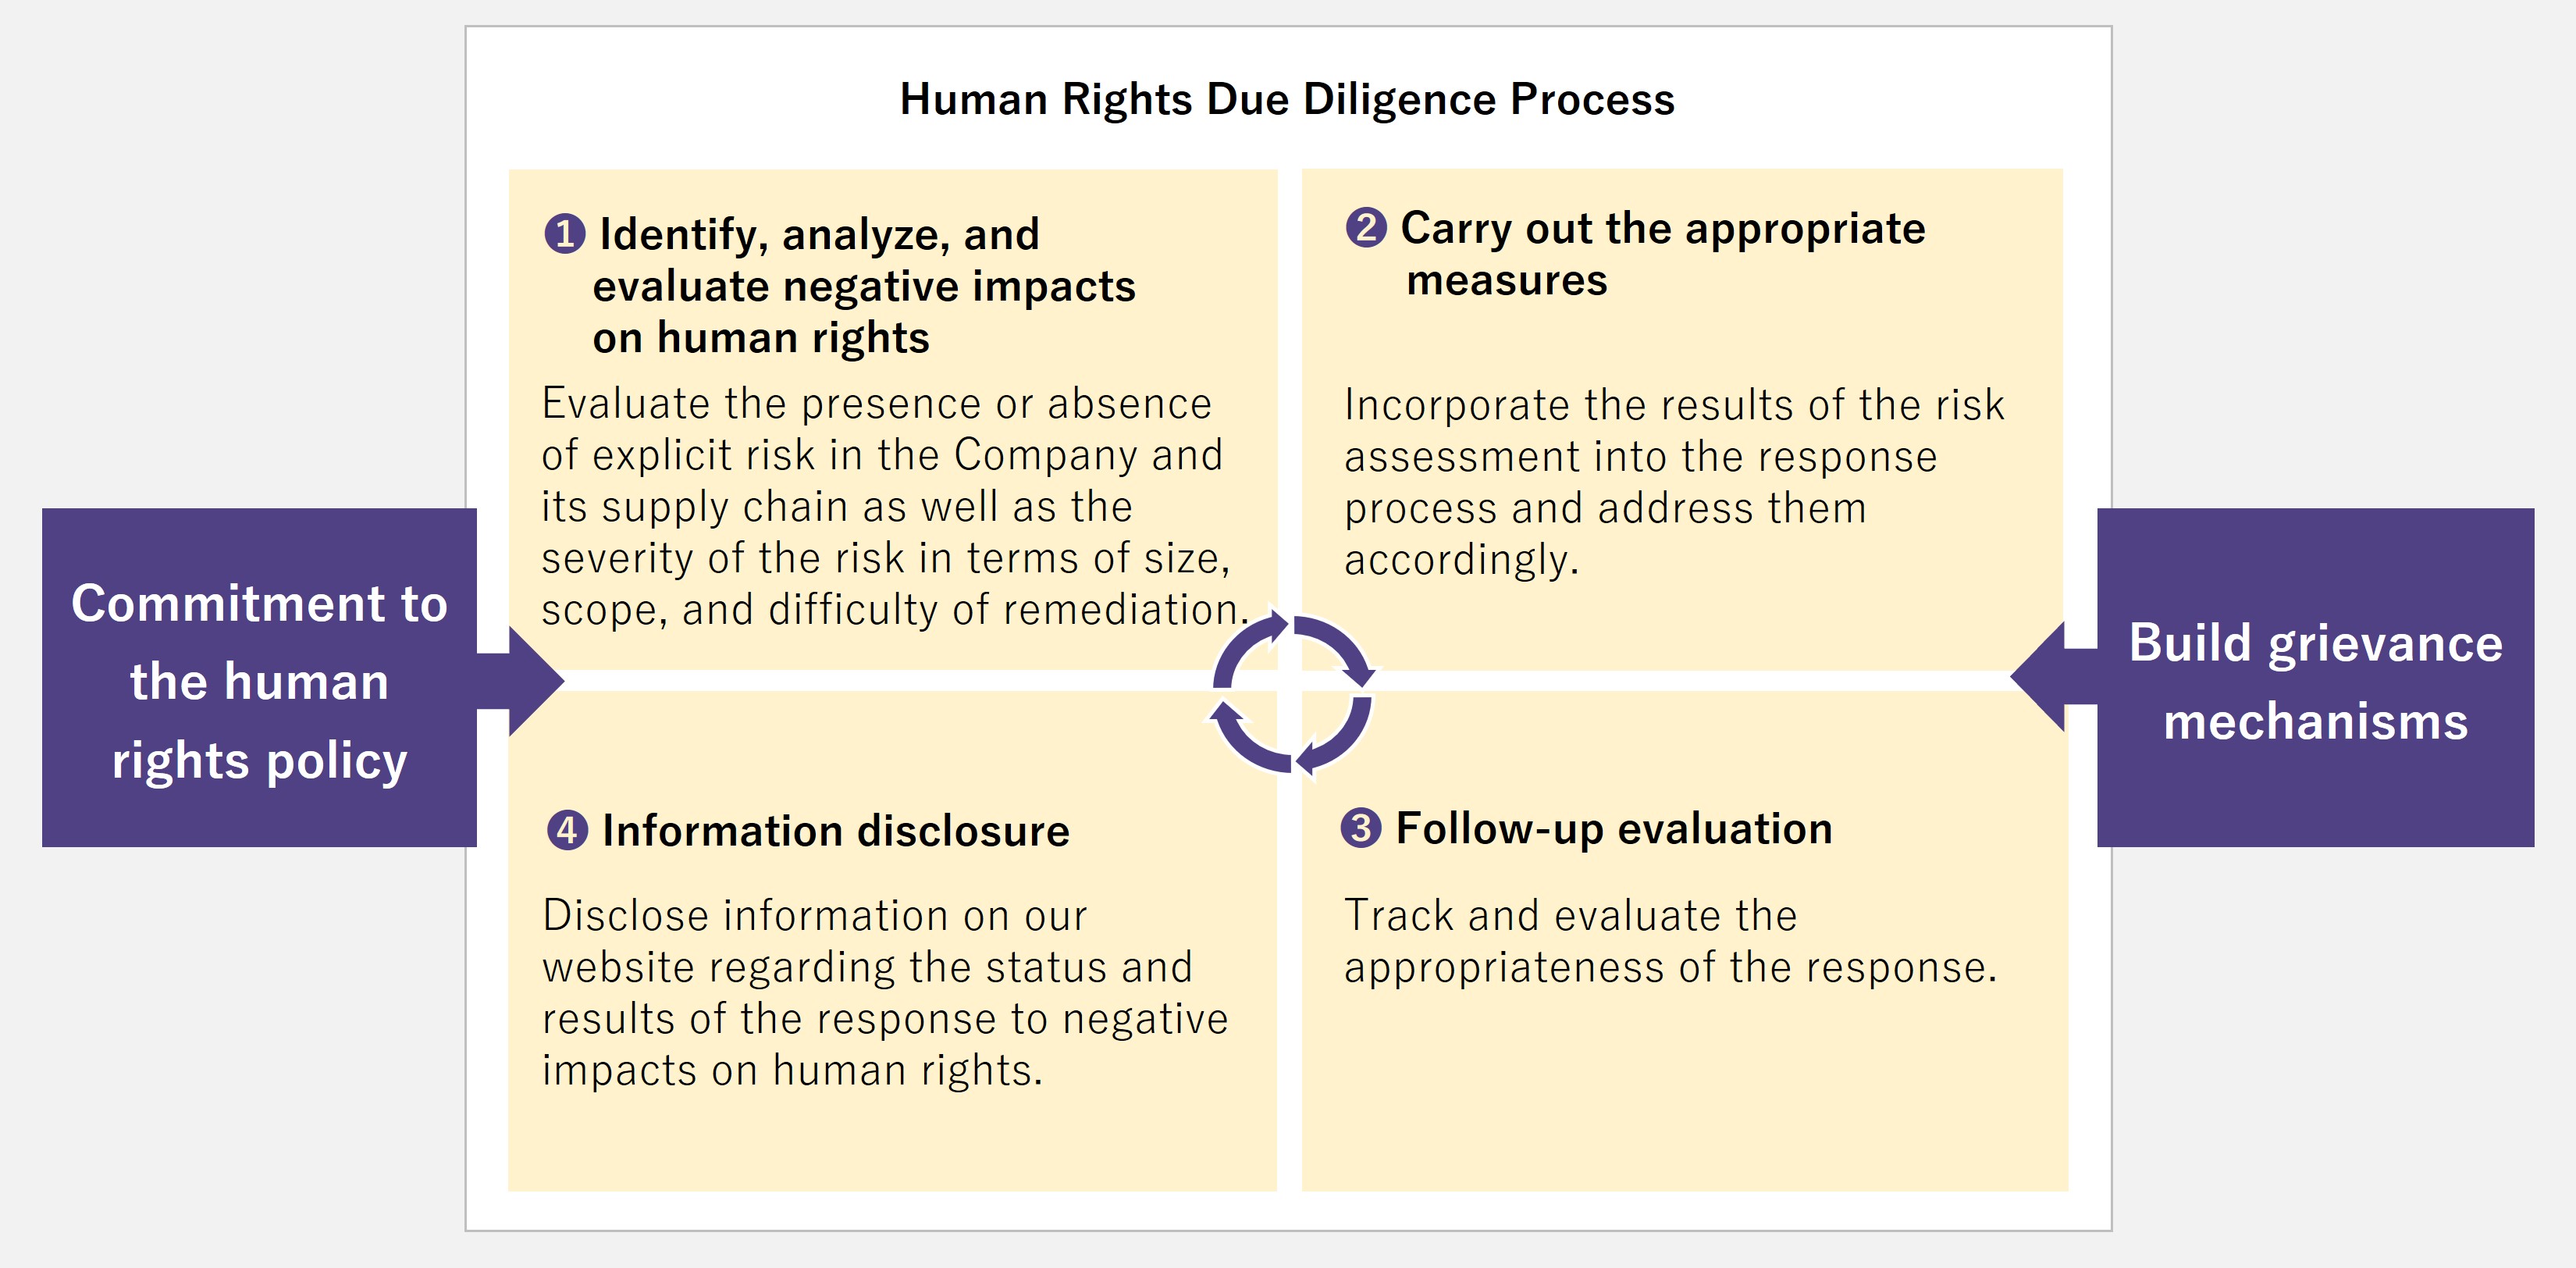 Human rights due diligence process